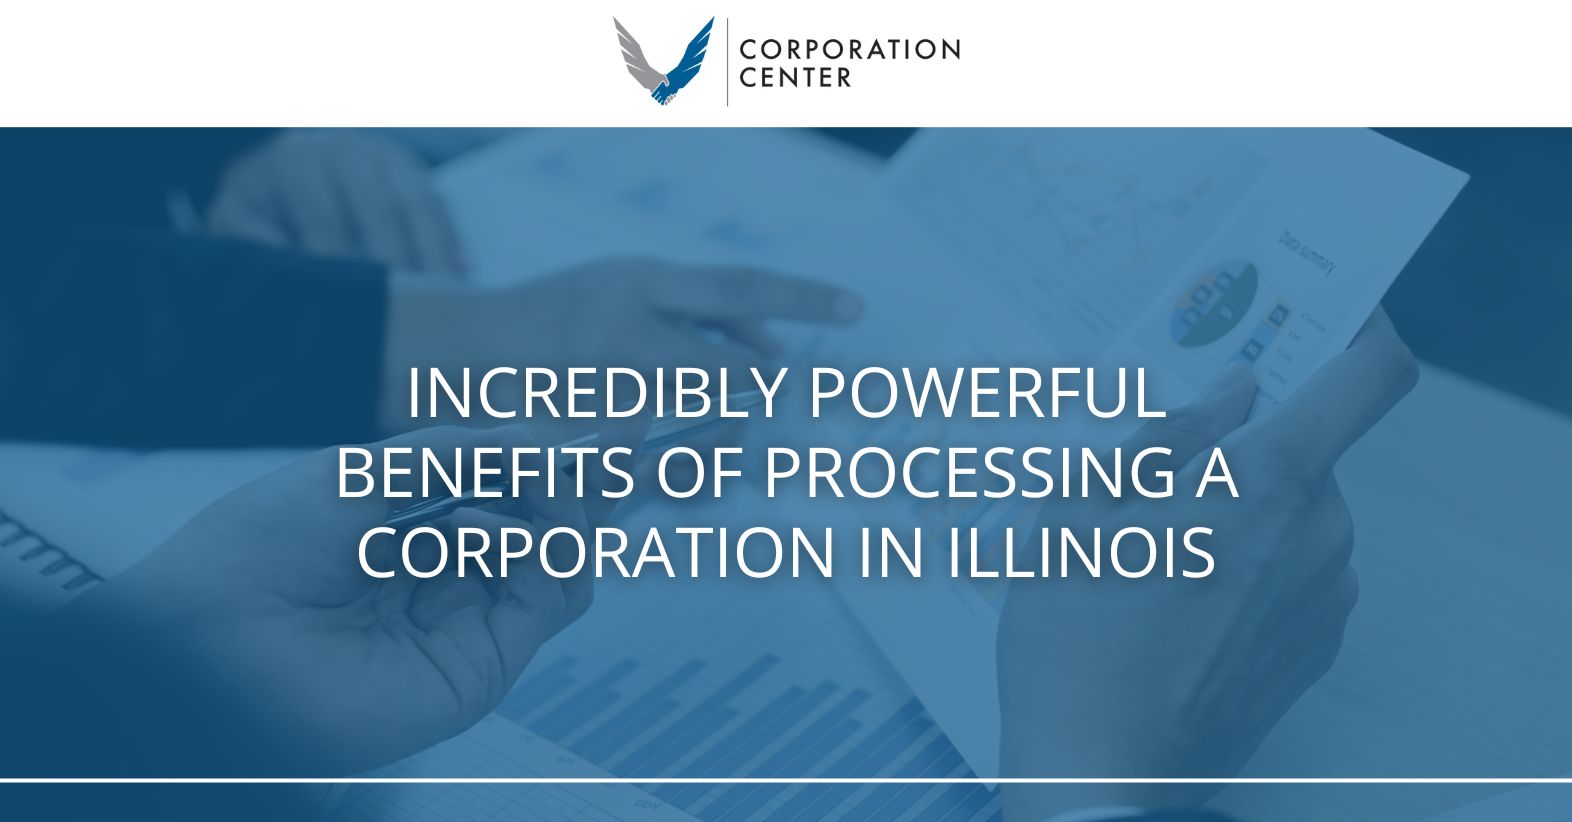 Processing a Corporation in Illinois